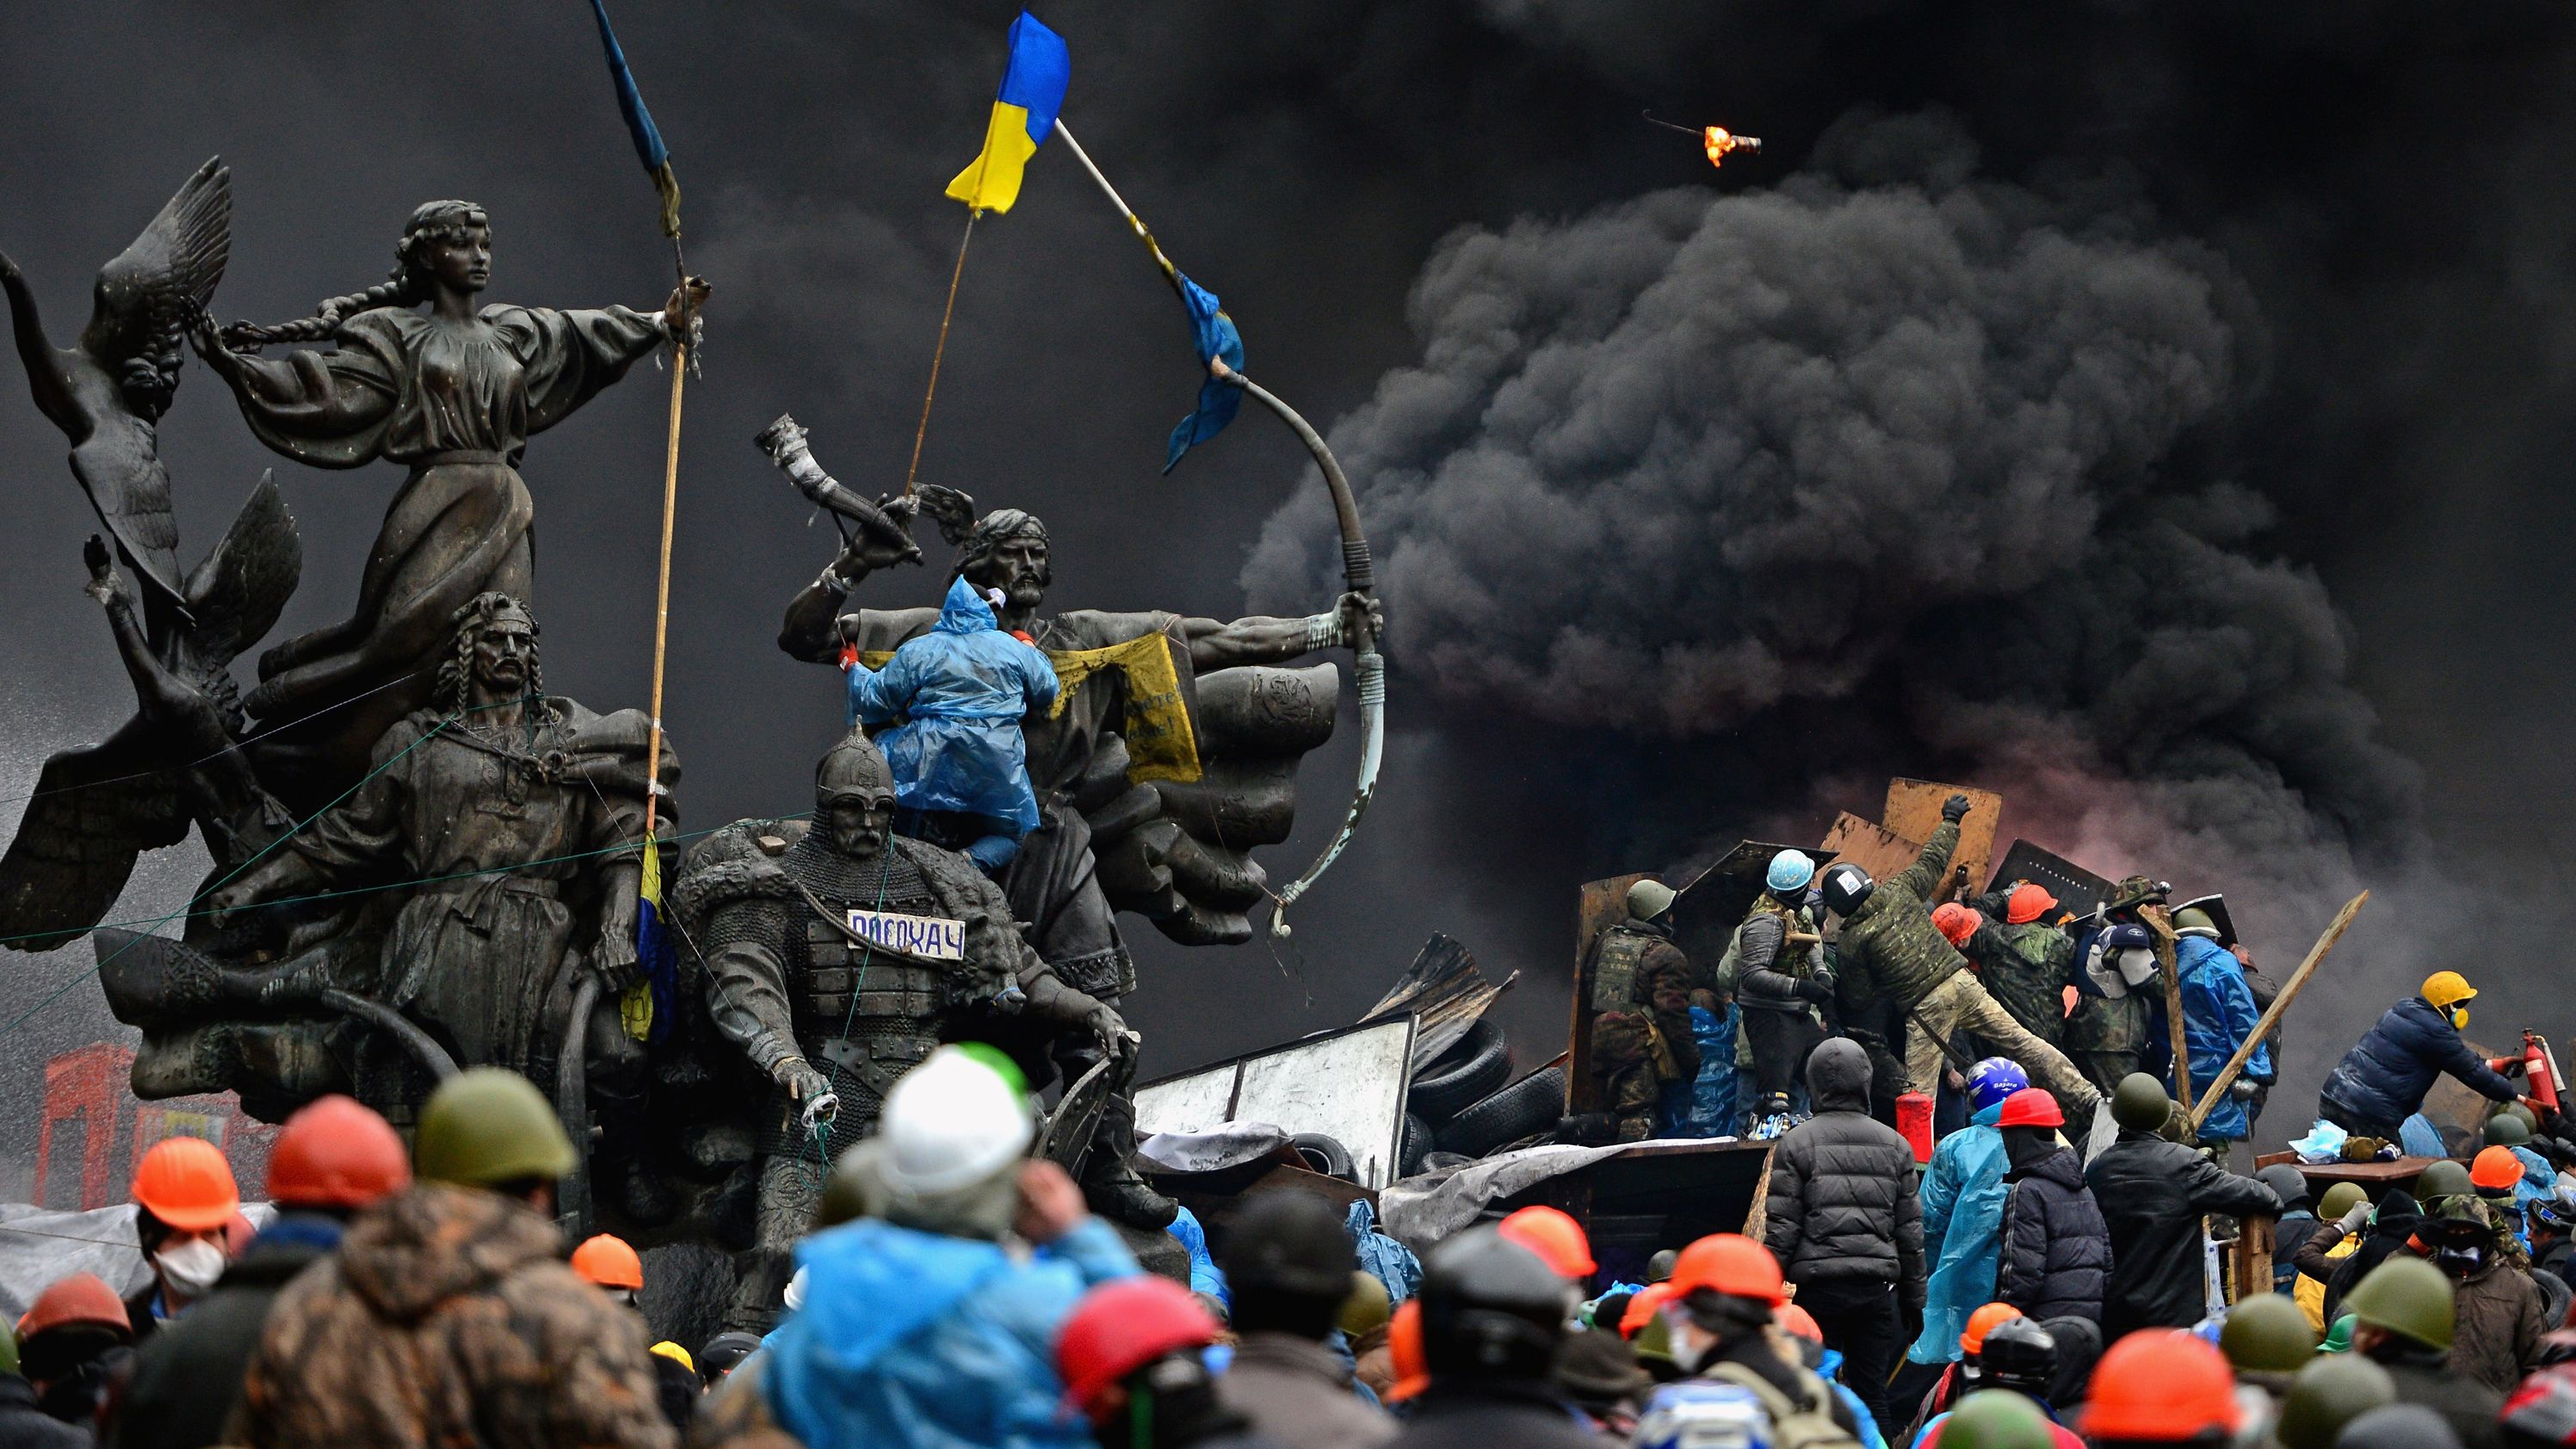 Anti-government protesters clash with police in Kiev, Ukraine, in February 2014. Kiev's Independence Square had been the center of anti-government protests since November 2013, when President Viktor Yanukovych reversed a decision on a trade deal with the European Union and instead turned toward Russia. <a href="https://www.cnn.com/2014/02/19/world/gallery/ukraine-protests-0218/index.html" target="_blank">The protests</a> soon led to the ouster of Yanukovych and triggered a chain of events that included Russia's annexation of the Crimean Peninsula.